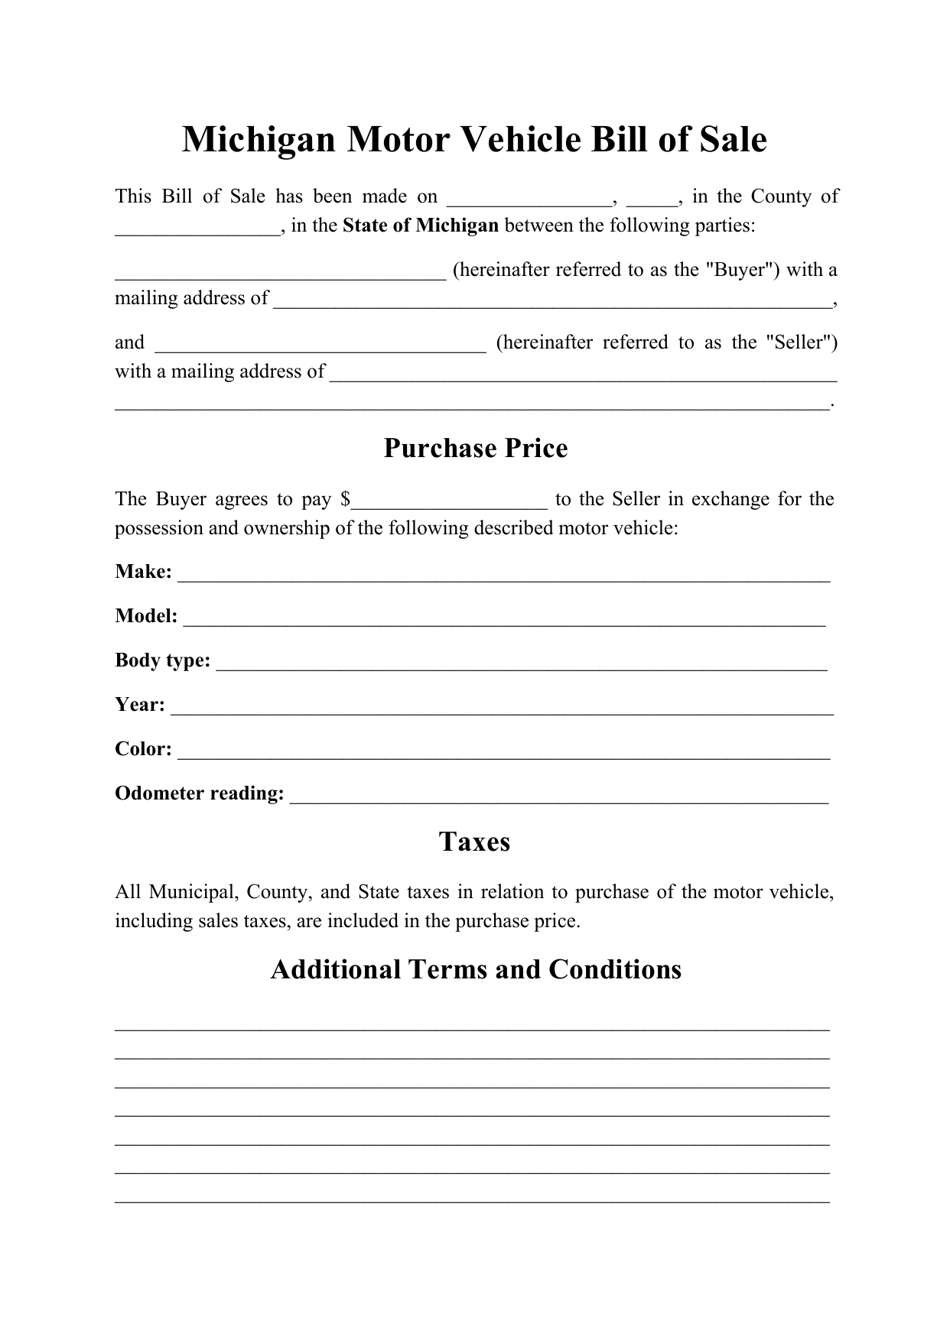 Motor Vehicle Bill of Sale Form - Michigan, Page 1